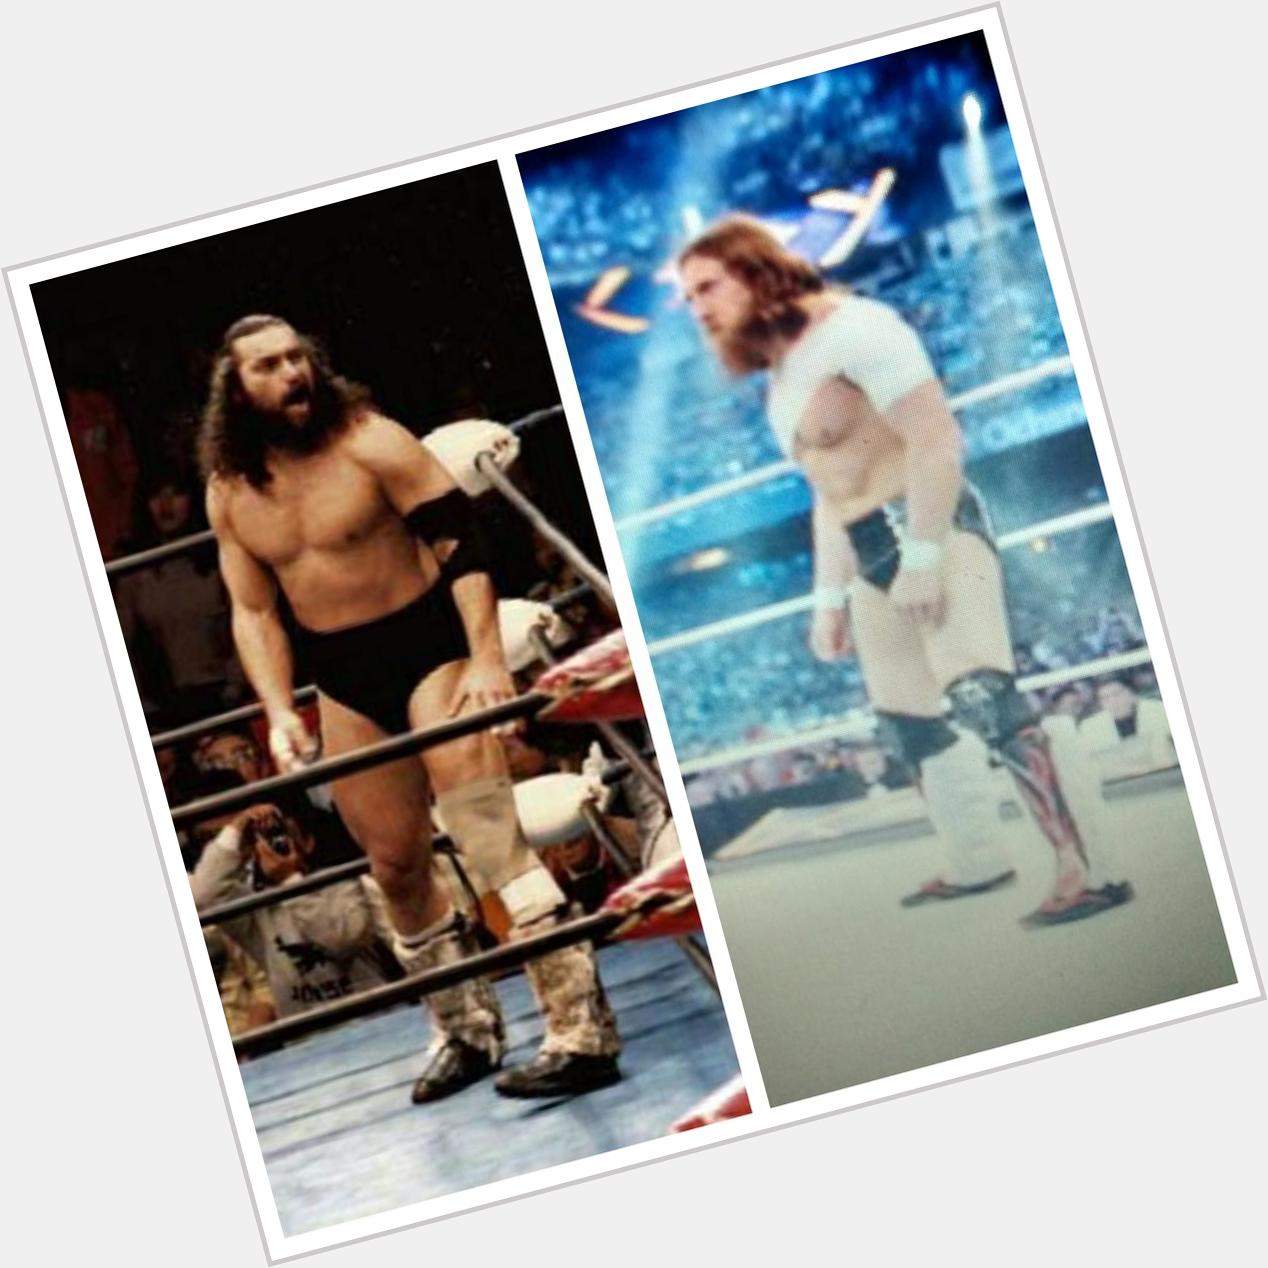 Happy birthday to the late Bruiser Brody, whose unique boots inspired the furry kickpads would wear. 